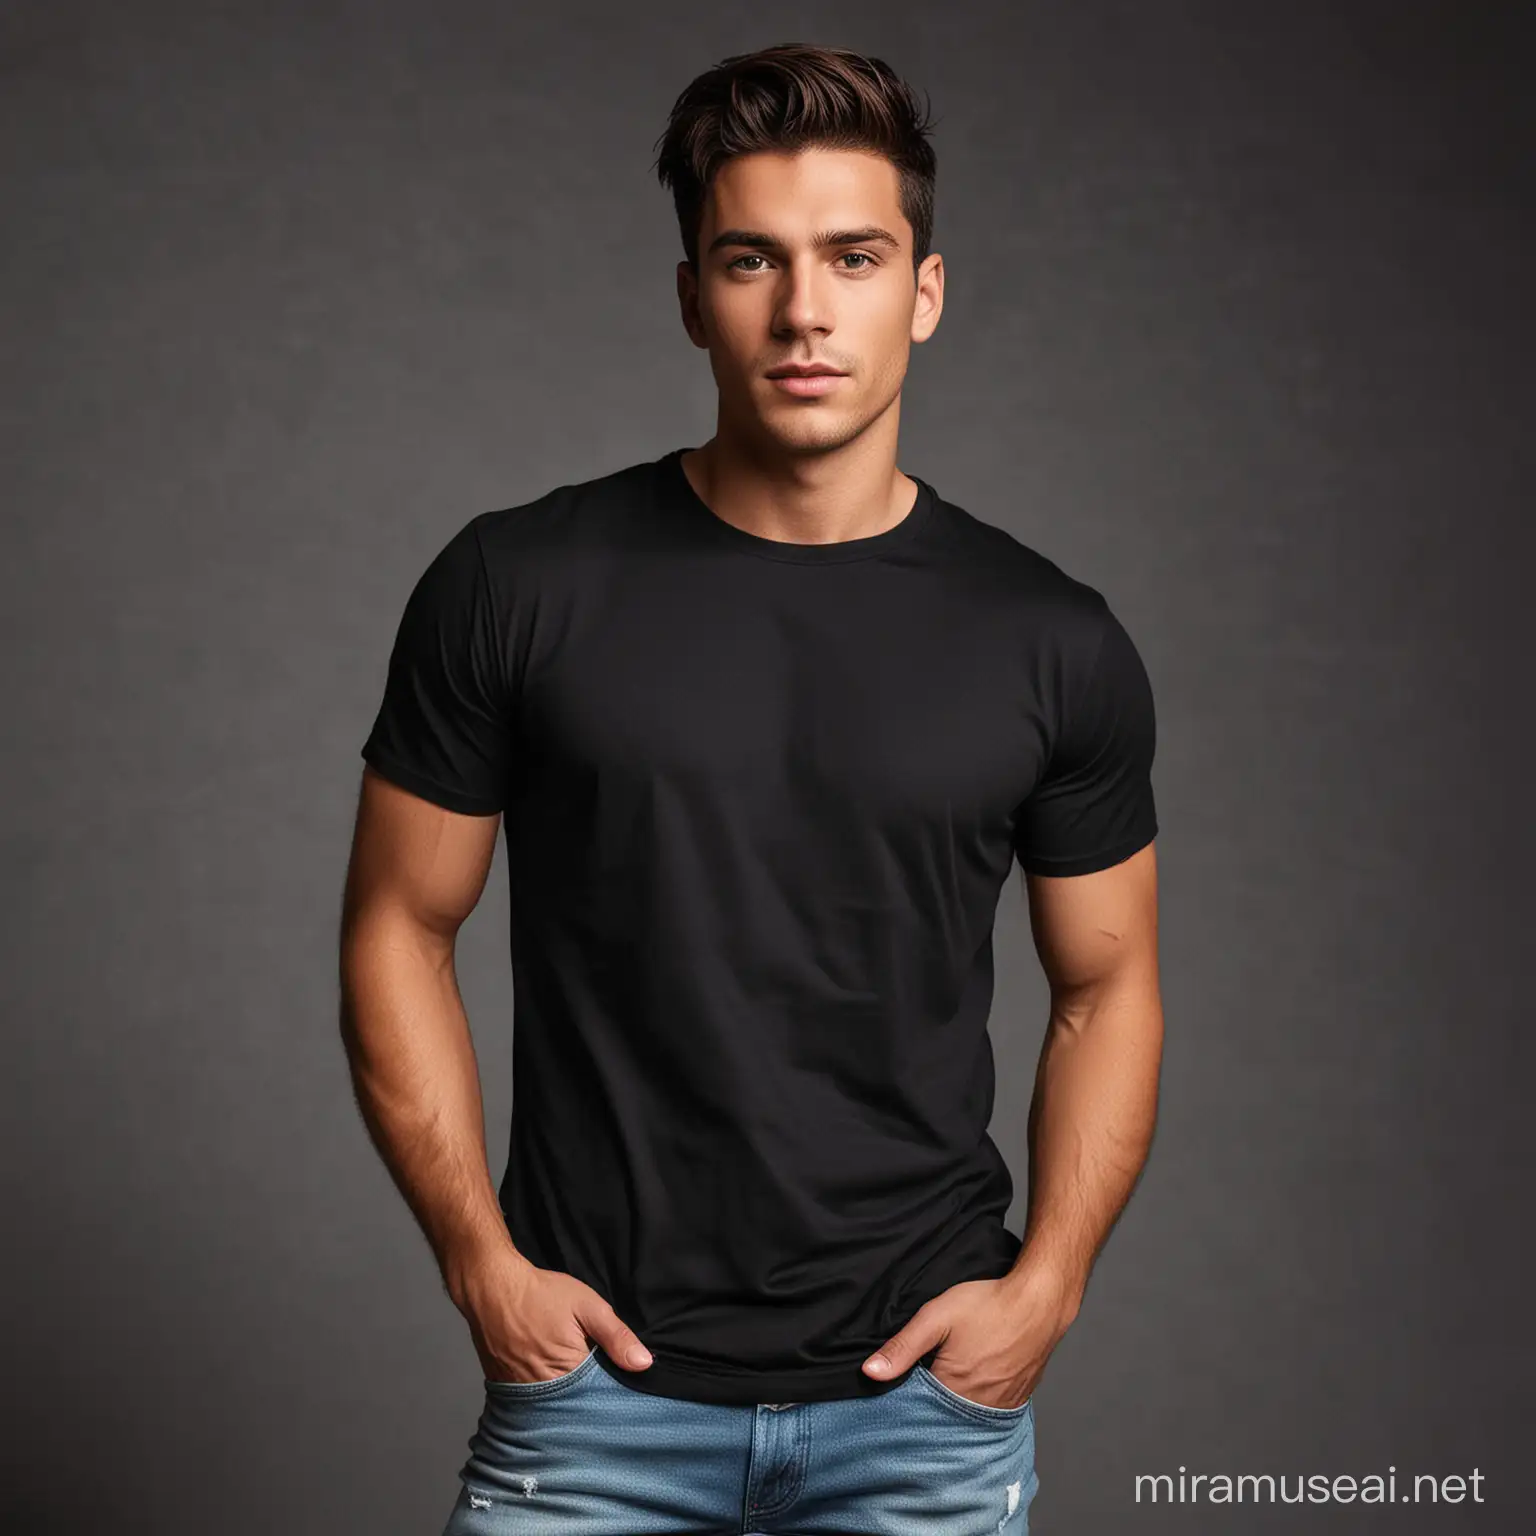 Male Models in Black TShirts on Diverse Backgrounds